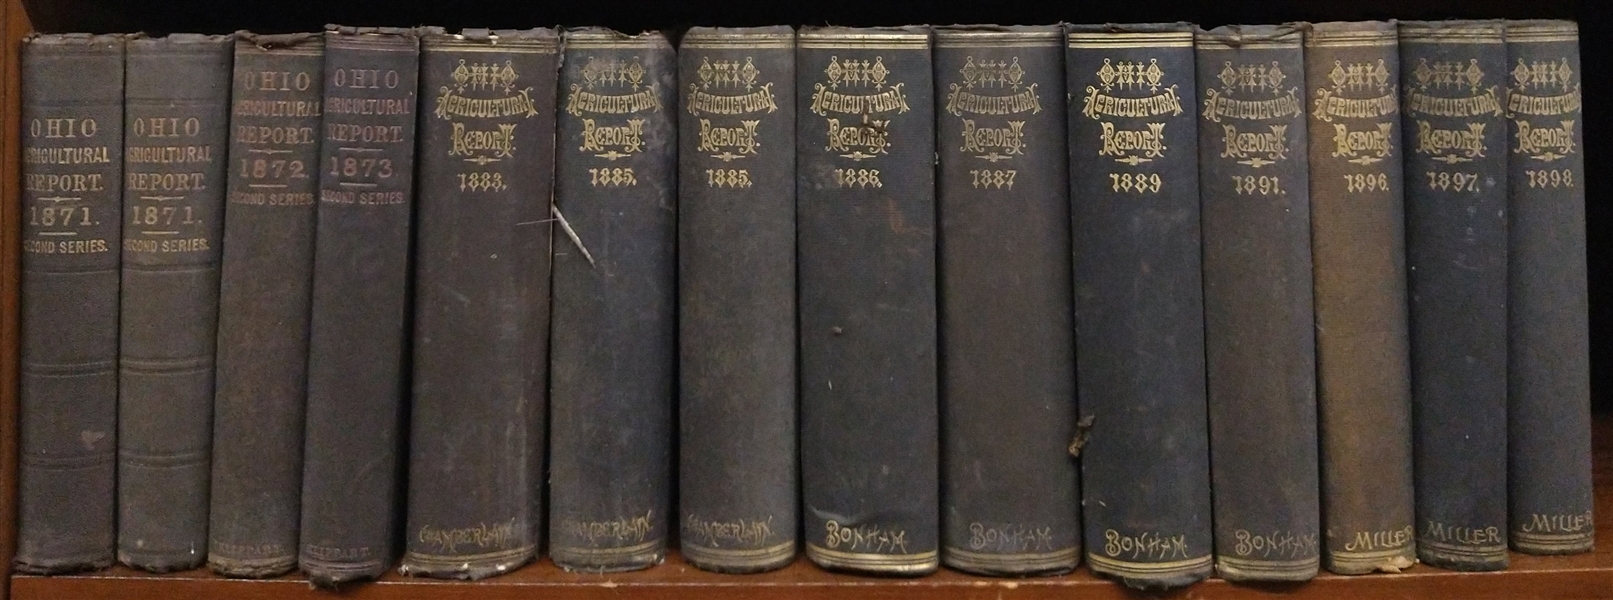 OHIO STATE BOARD ANNUAL AGRICULTURAL REPORT 1851 - 1898 , 26 Volumes